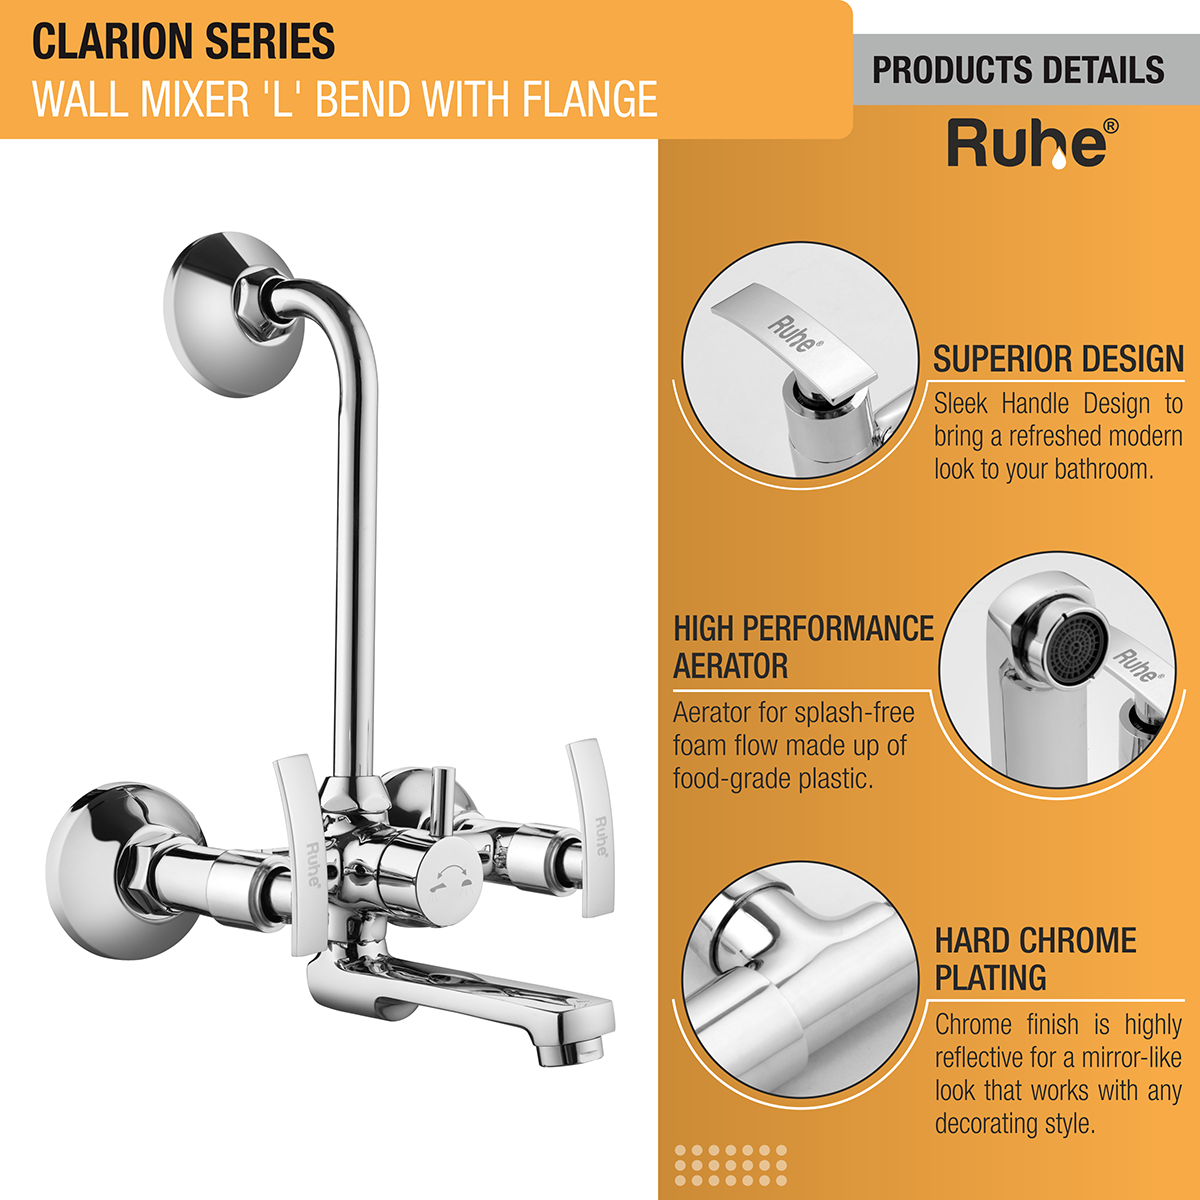 Clarion Wall Mixer Brass Faucet with L Bend product details